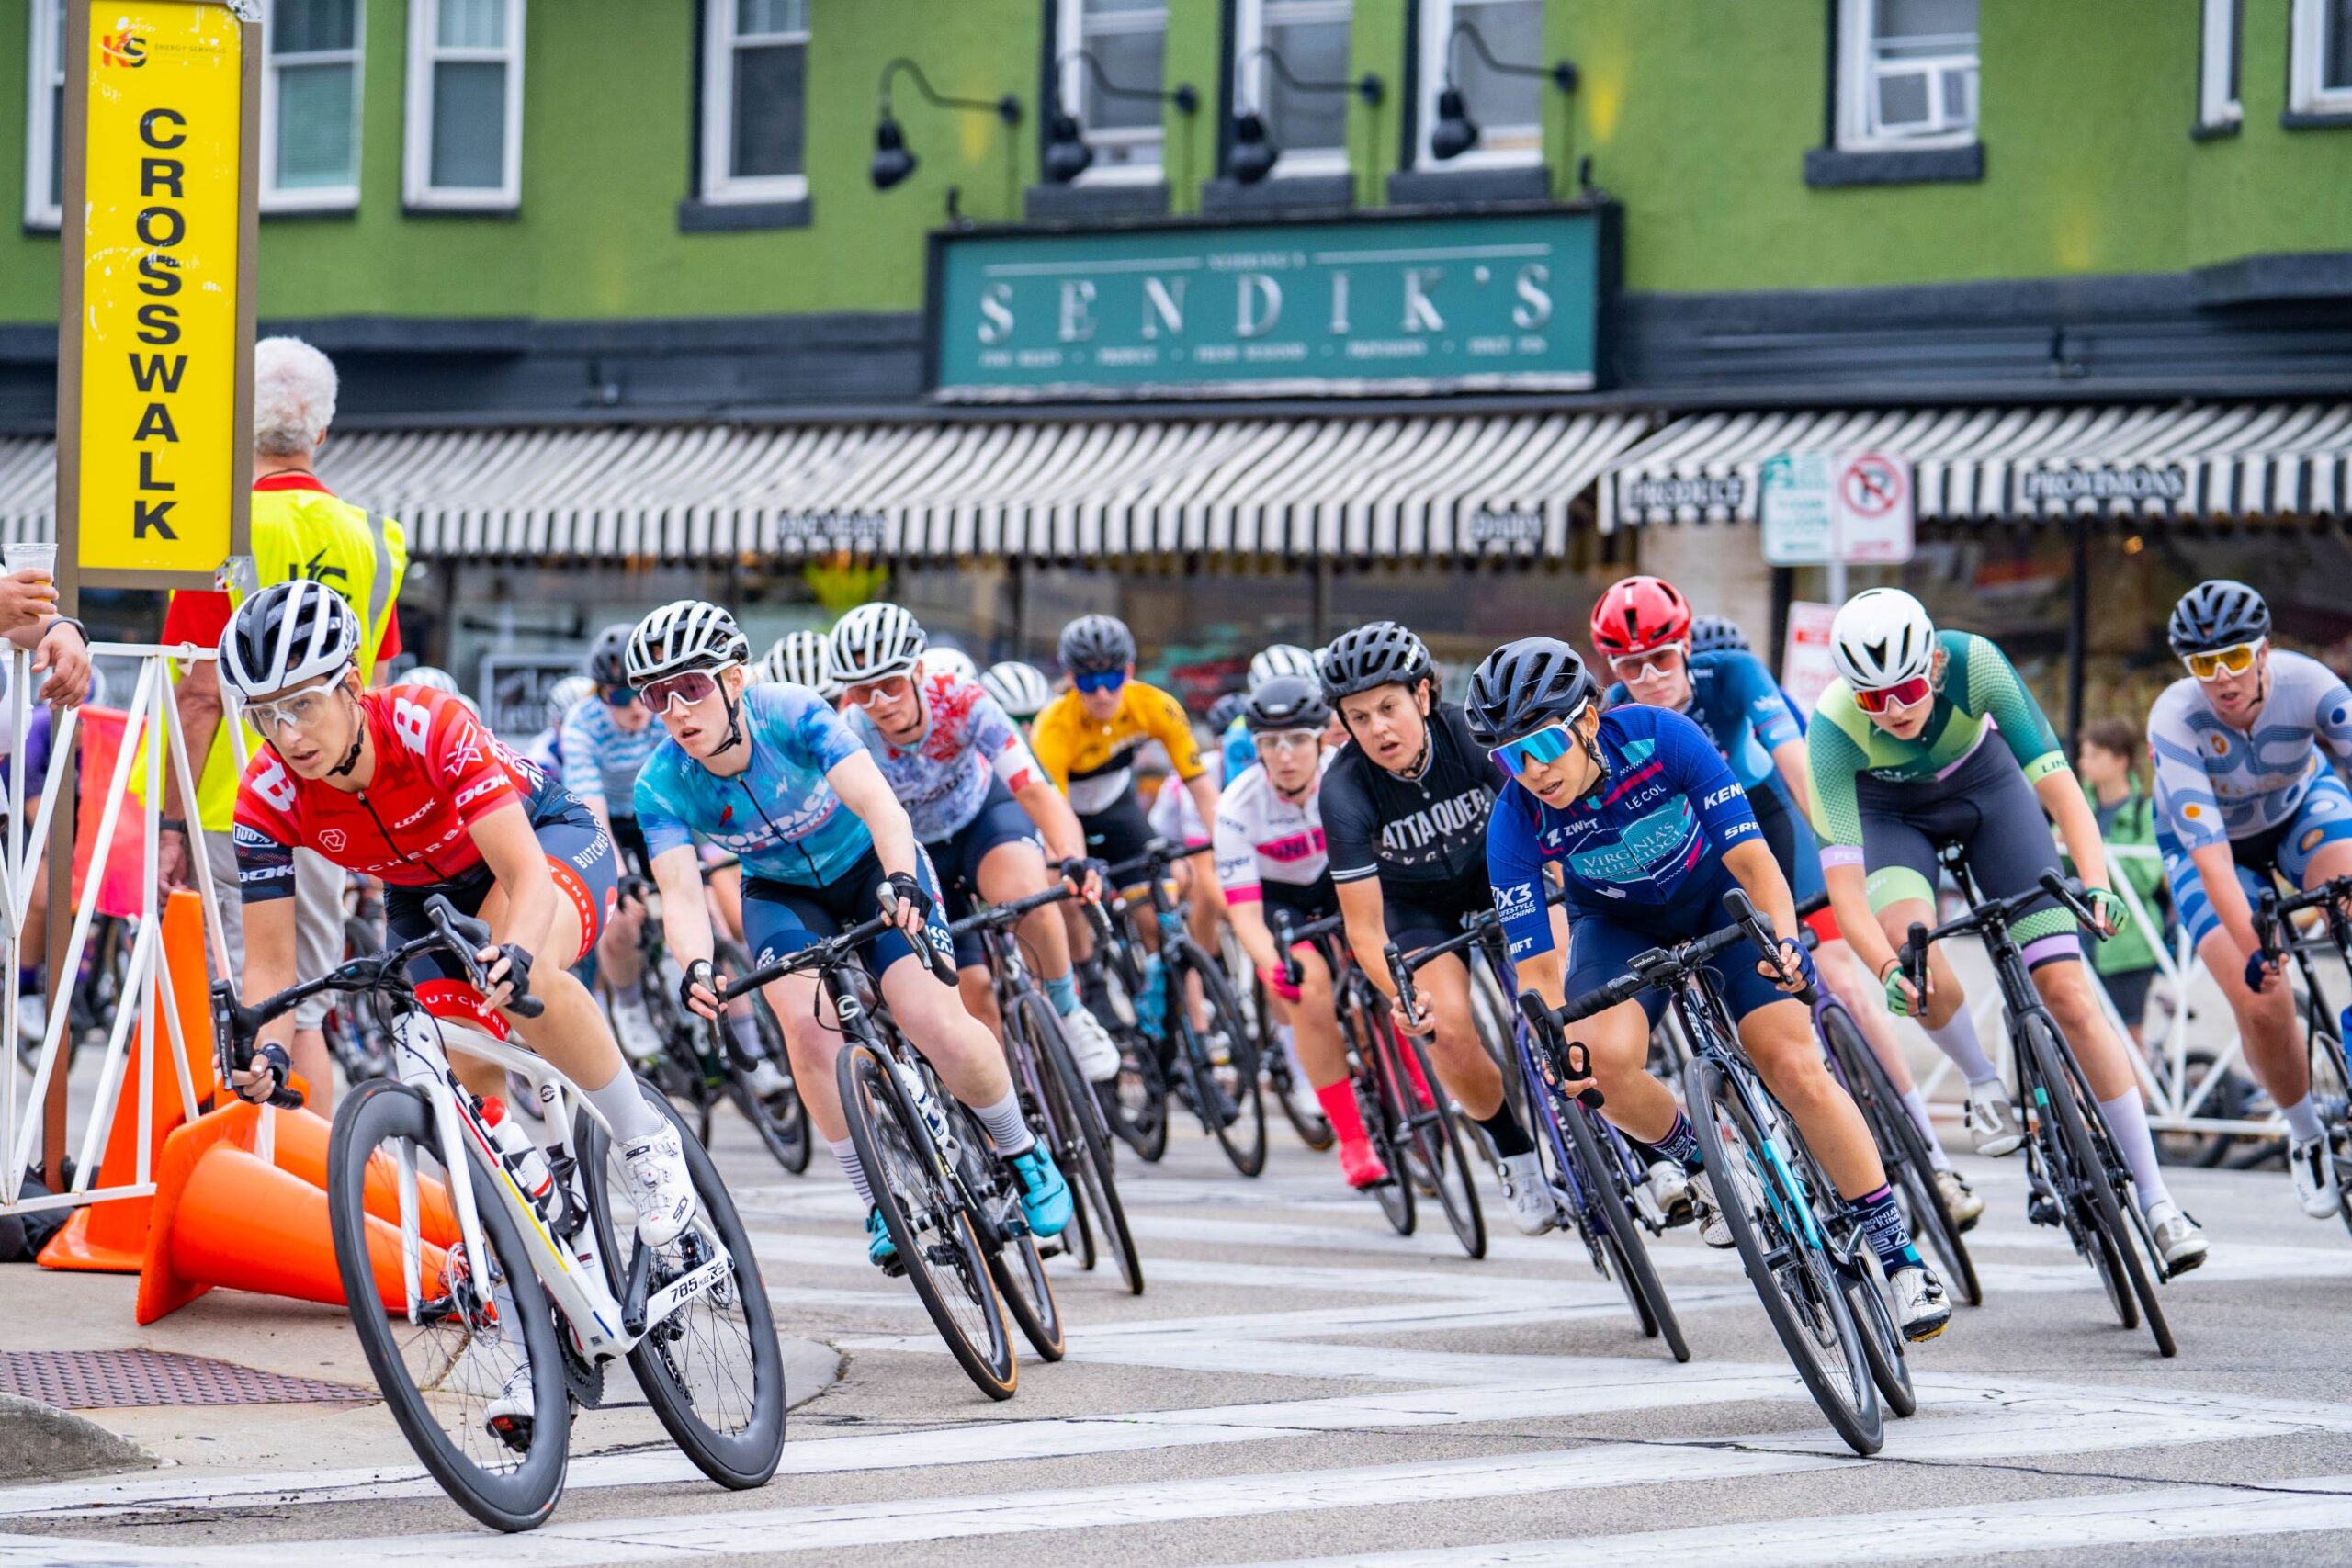 Tour of America's Dairyland: 45th Annual Café Hollander Otto Wenz Downer Classic